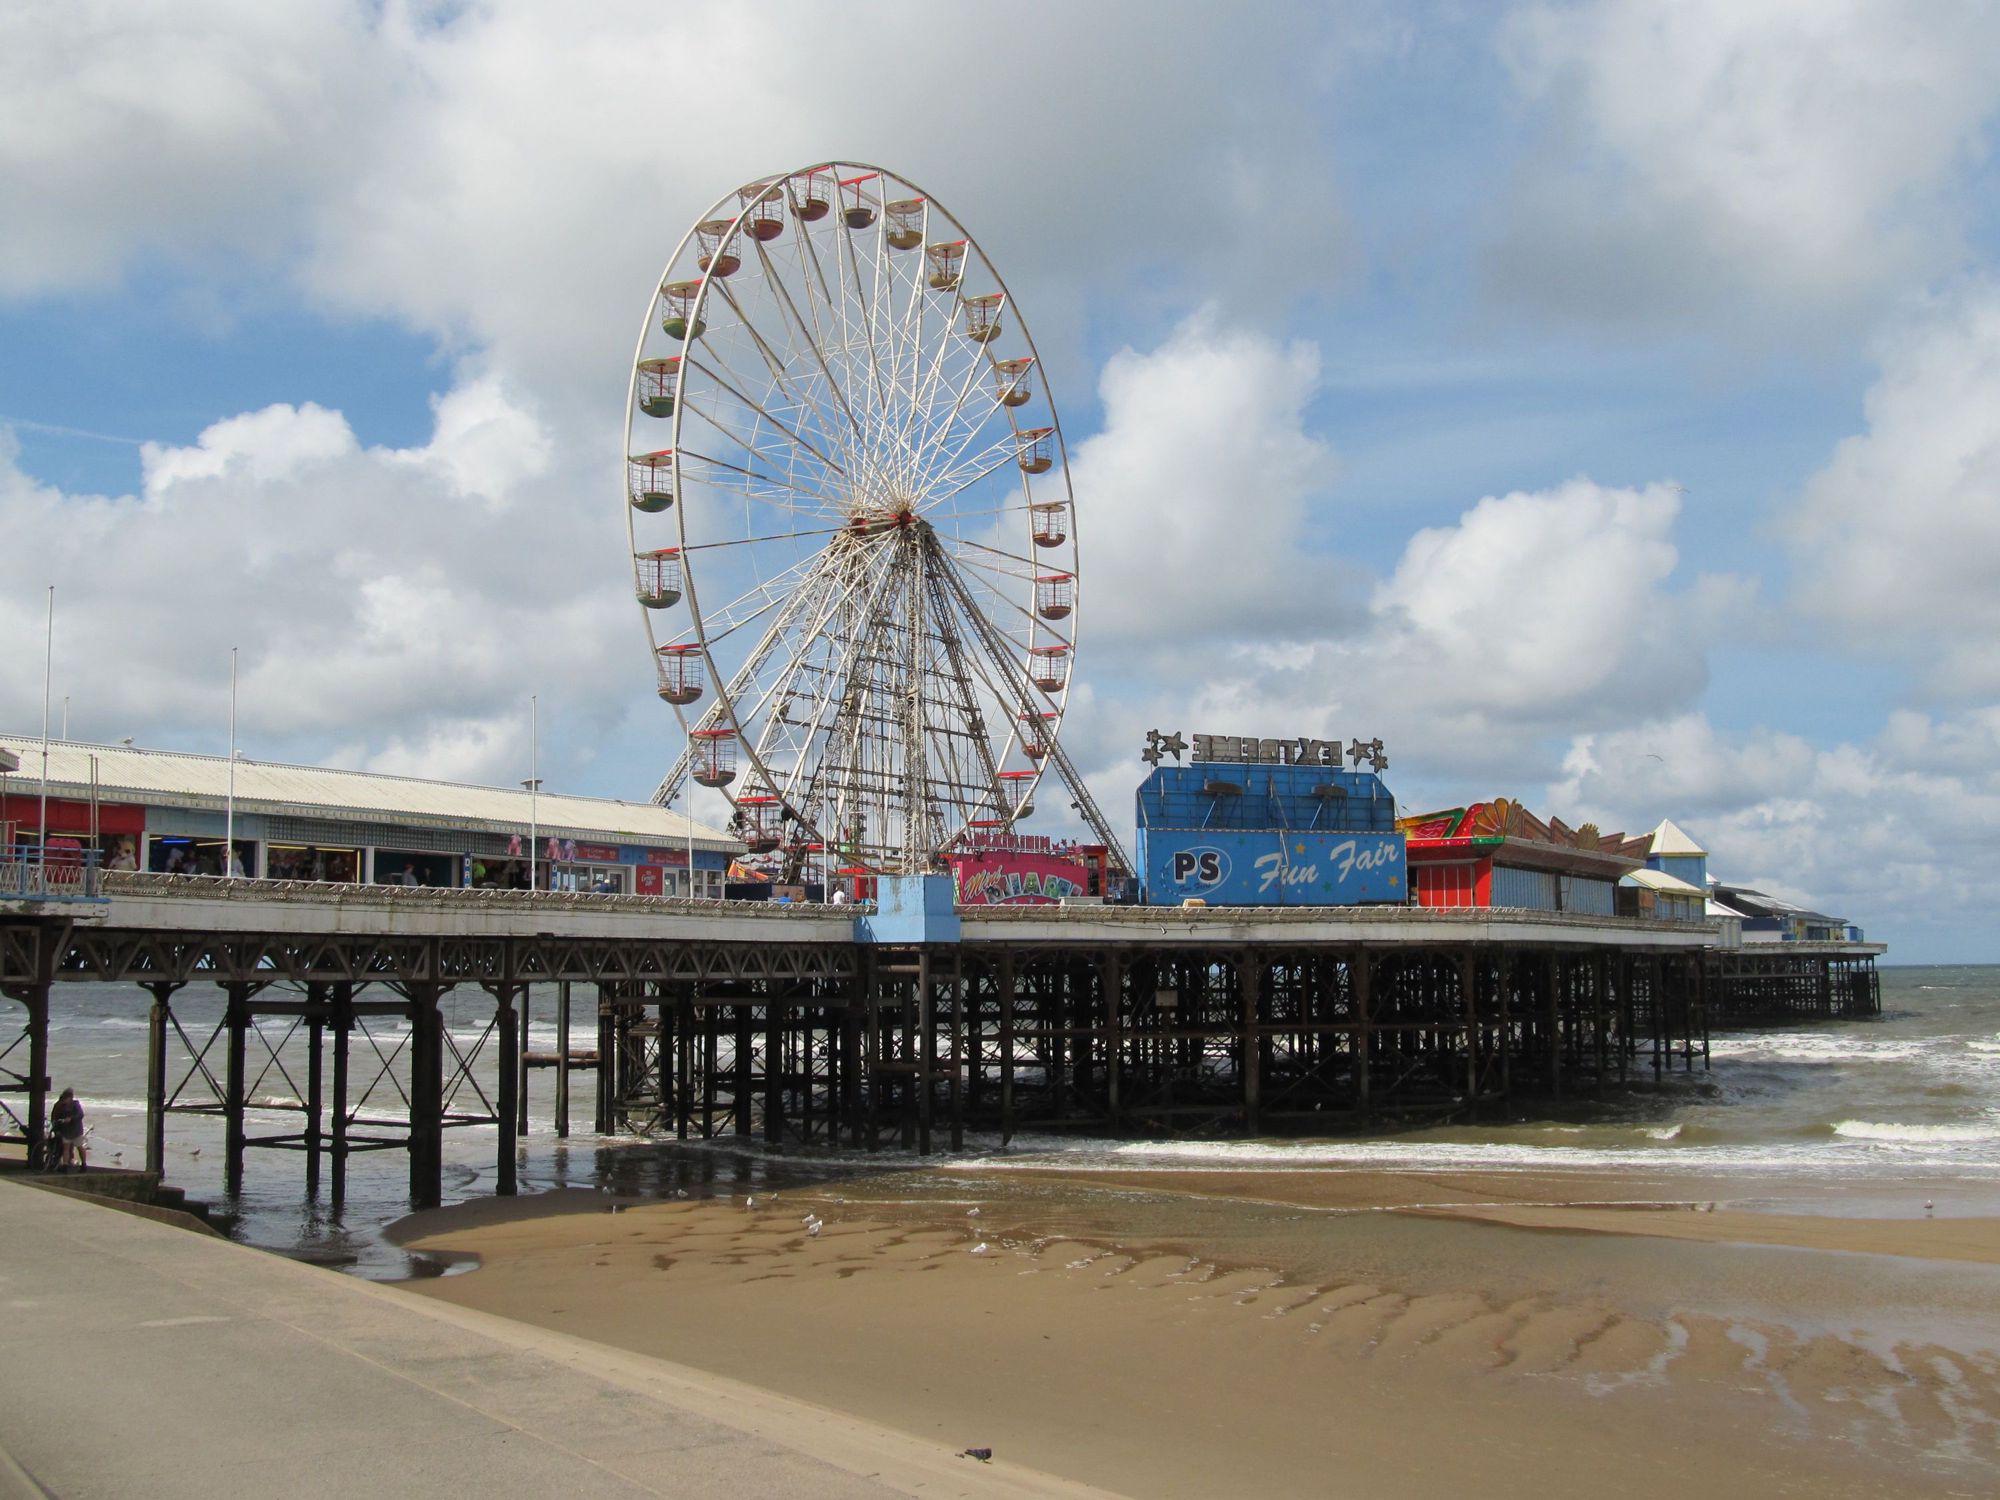 The Best Hotels, B&Bs & Self-Catering in Blackpool